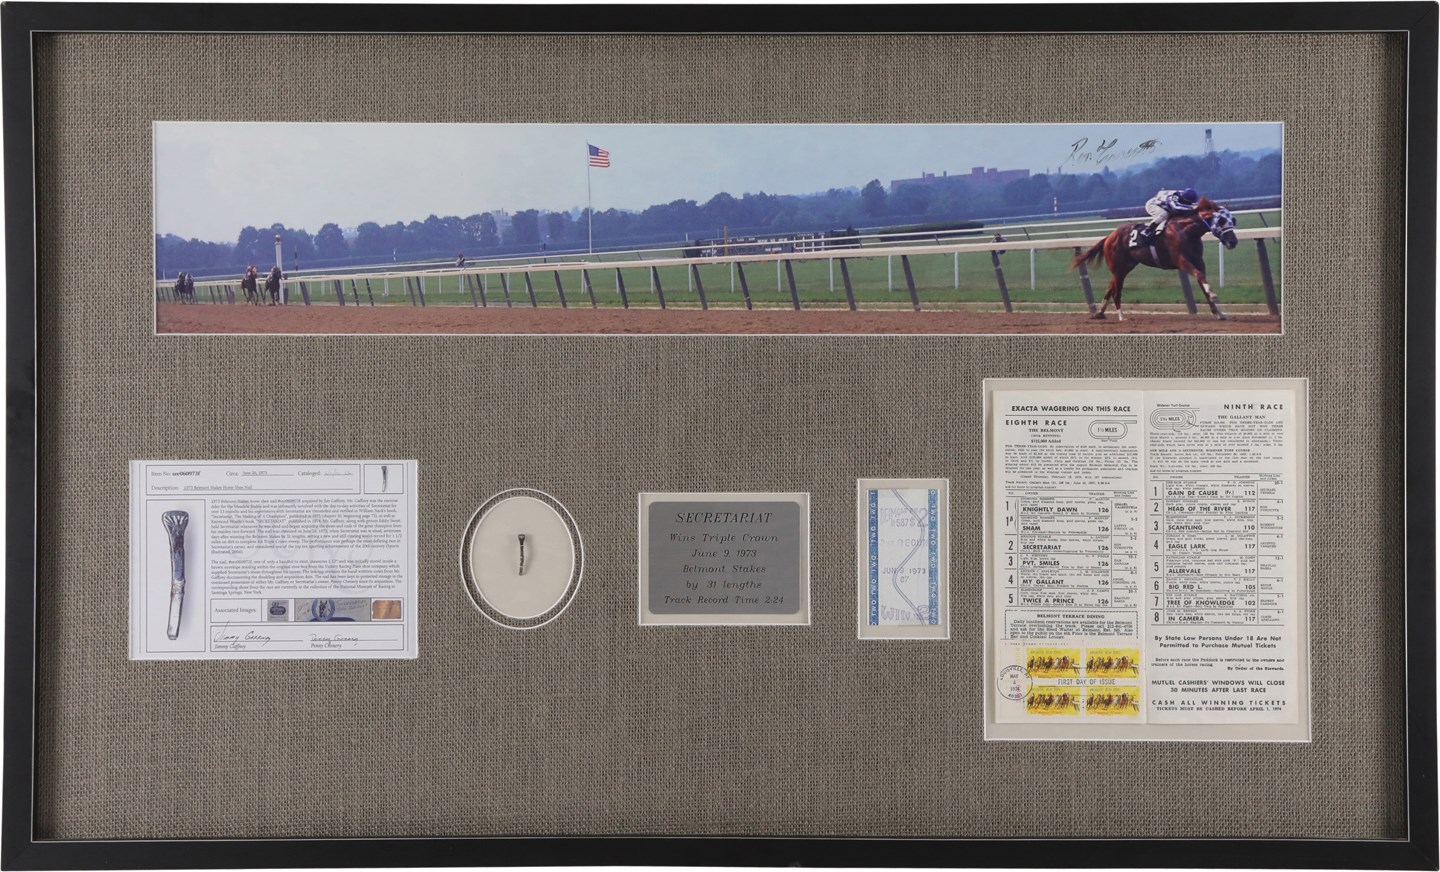 Horse Racing - 1973 Secretariat Nail from Belmont Stakes Triple Crown Victory (ex-Jim Gaffney Collection)